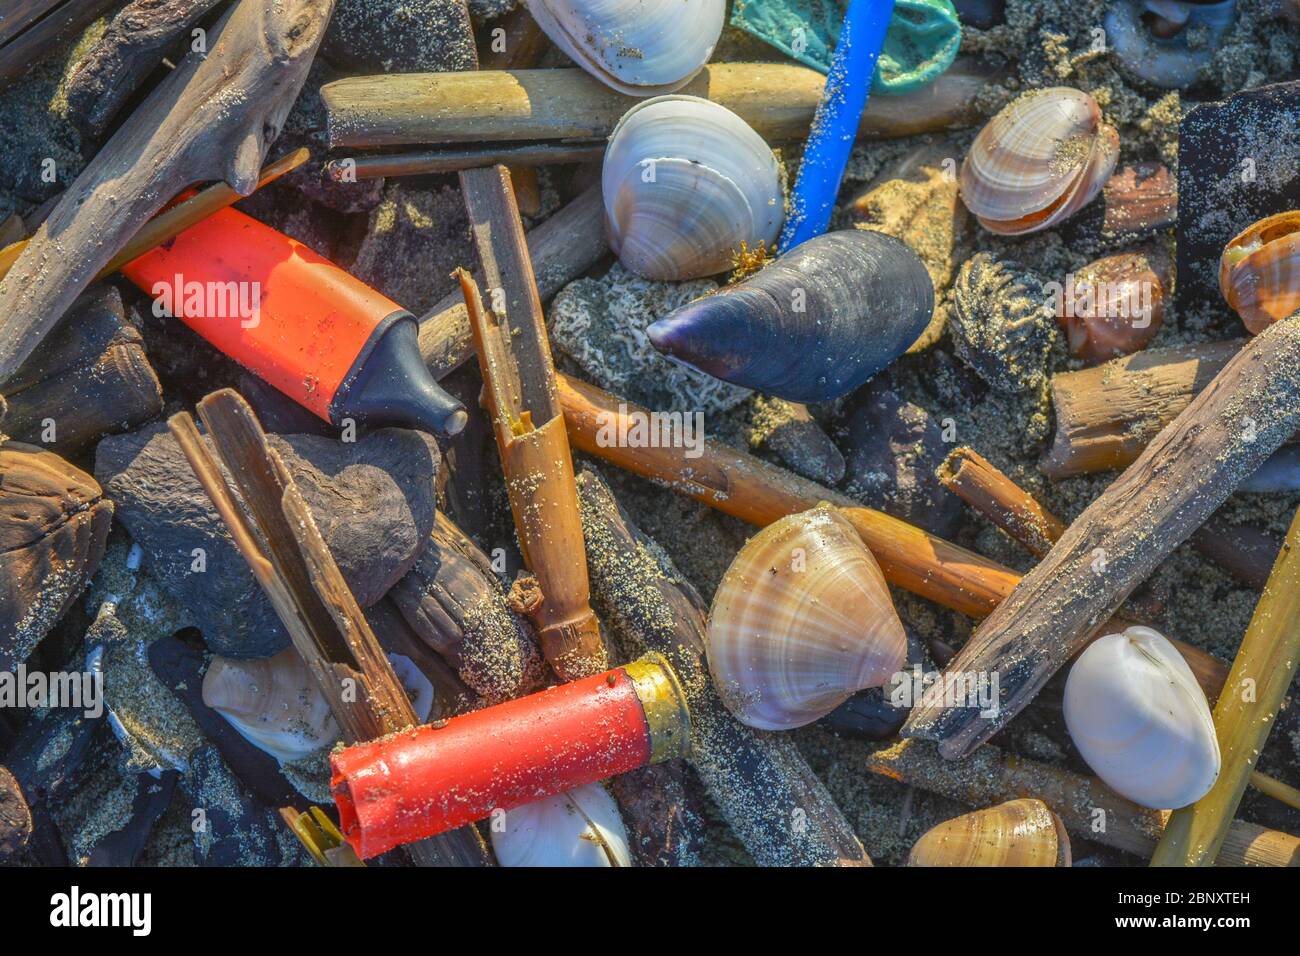 Closeup of a scene of pollution on a beach: a plastic marker and a shotgun shell washed up ashore together with dead seashells and mussels. Enviroment Stock Photo